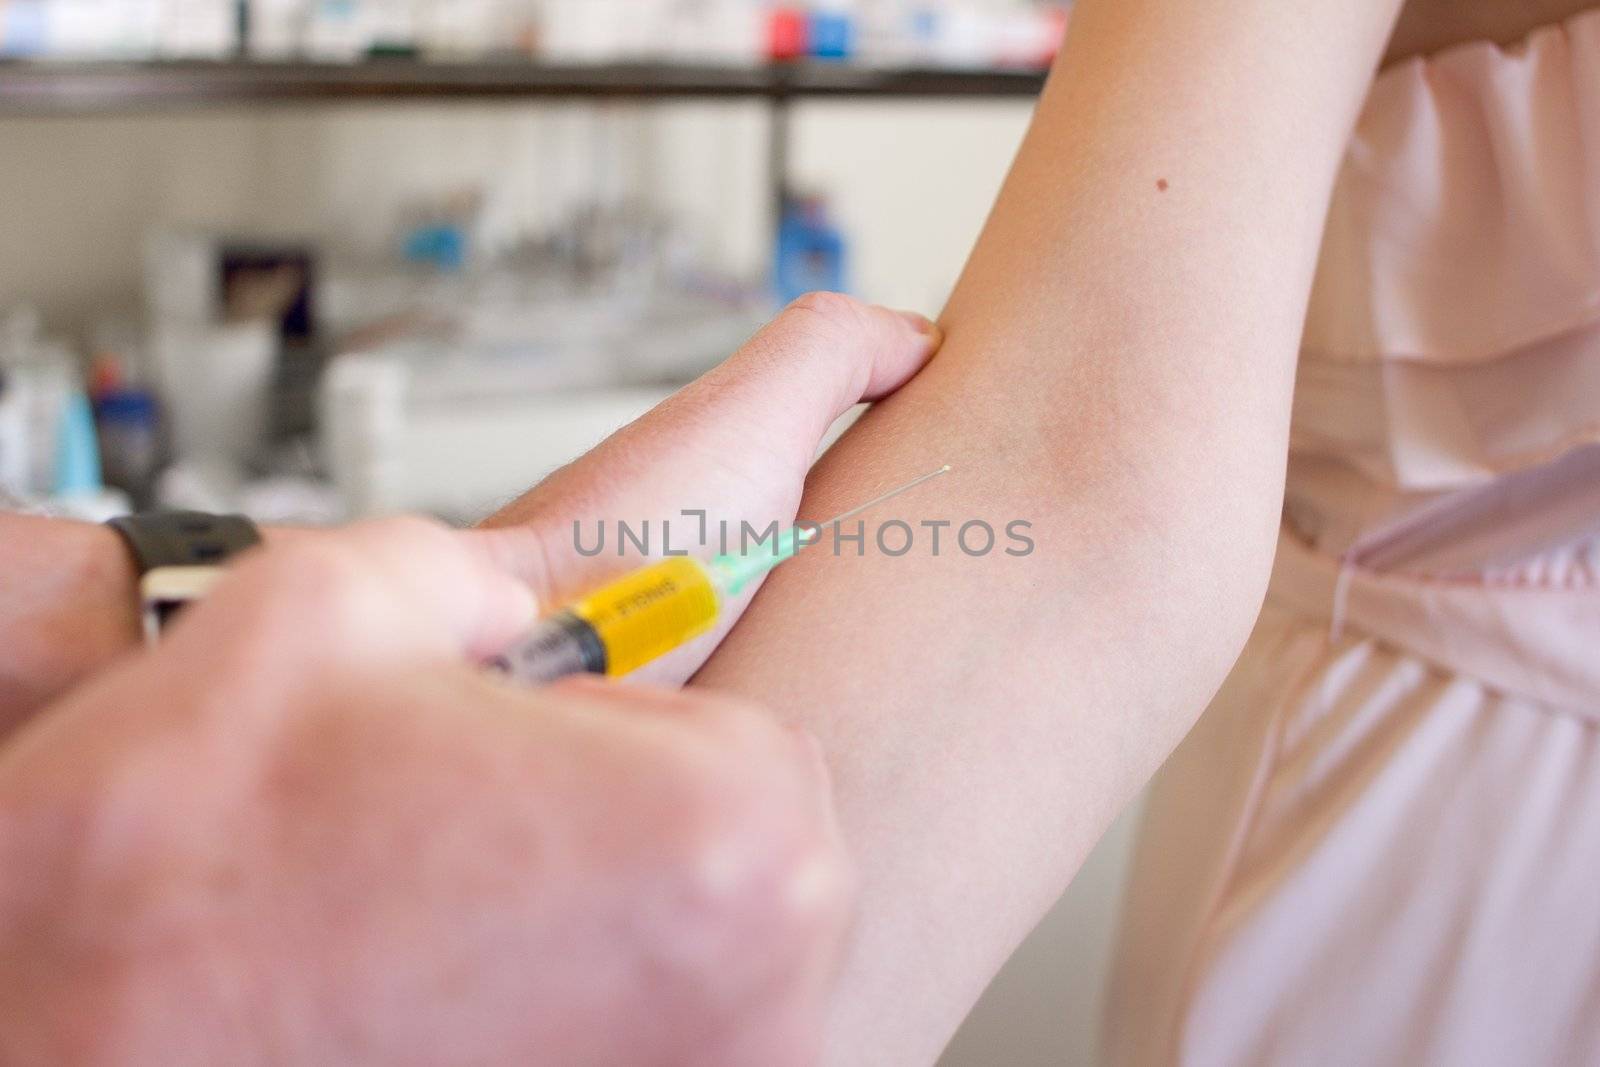 Woman getting a vaccination in the arm